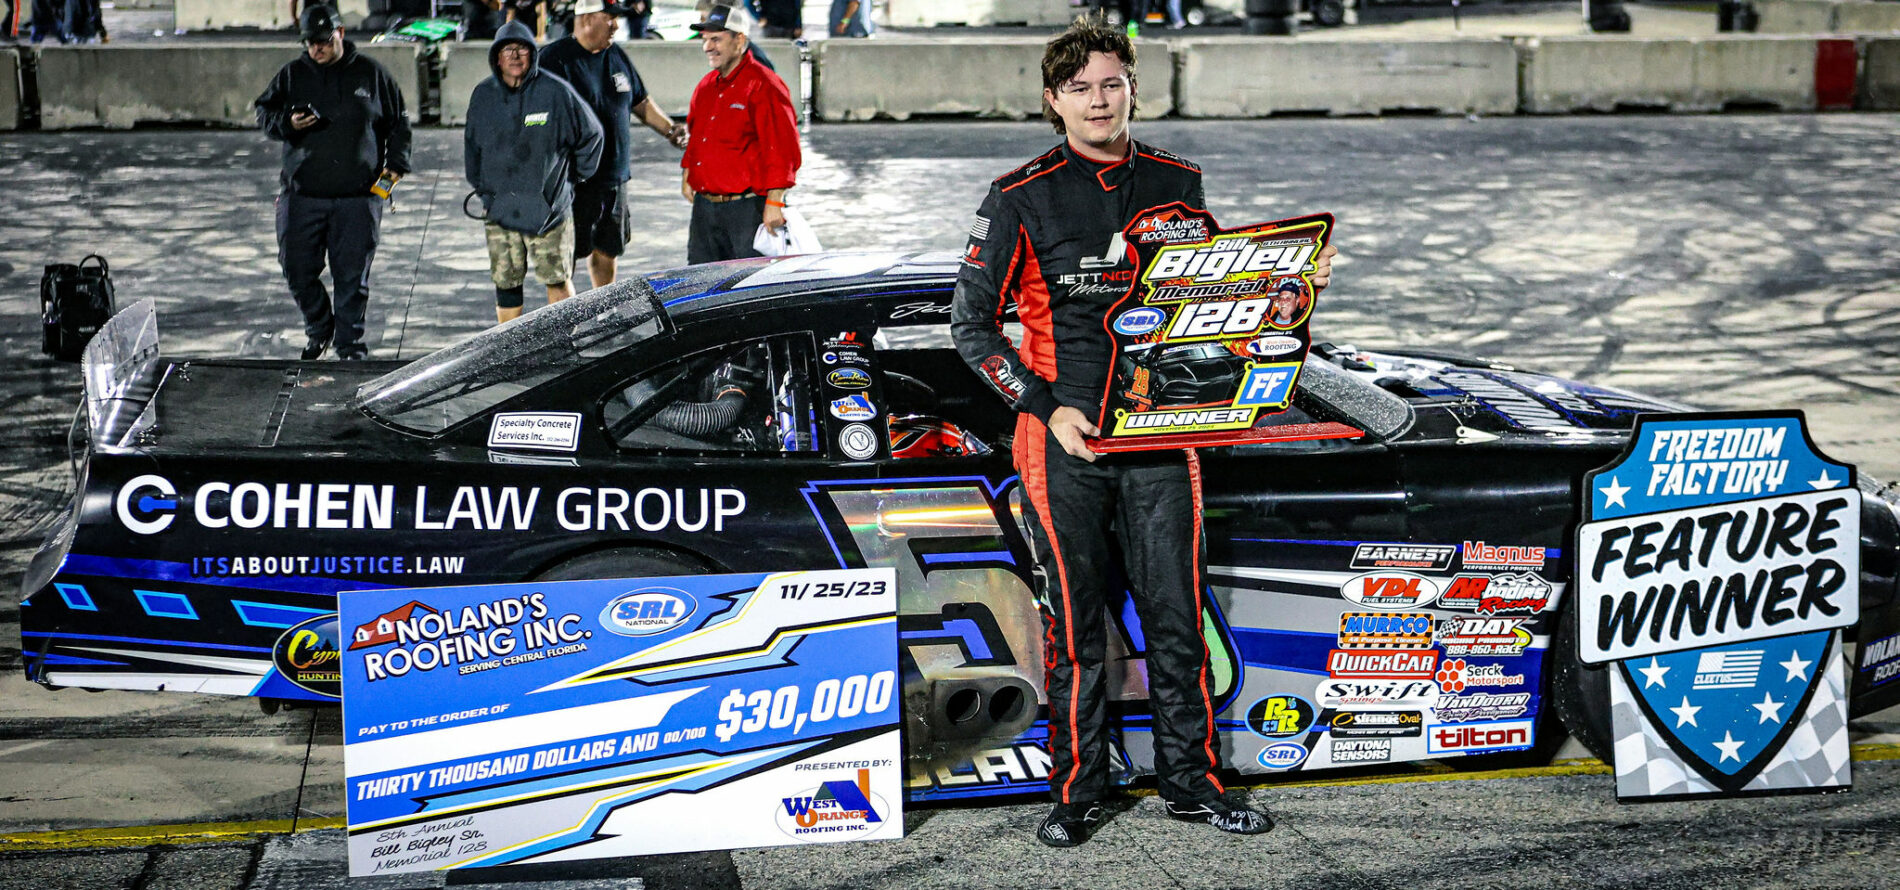 image of Jett Noland in front of Jett Noland Motorsports car number 50 holding the victory sign for the 8th annual Bill Bigley memorial race